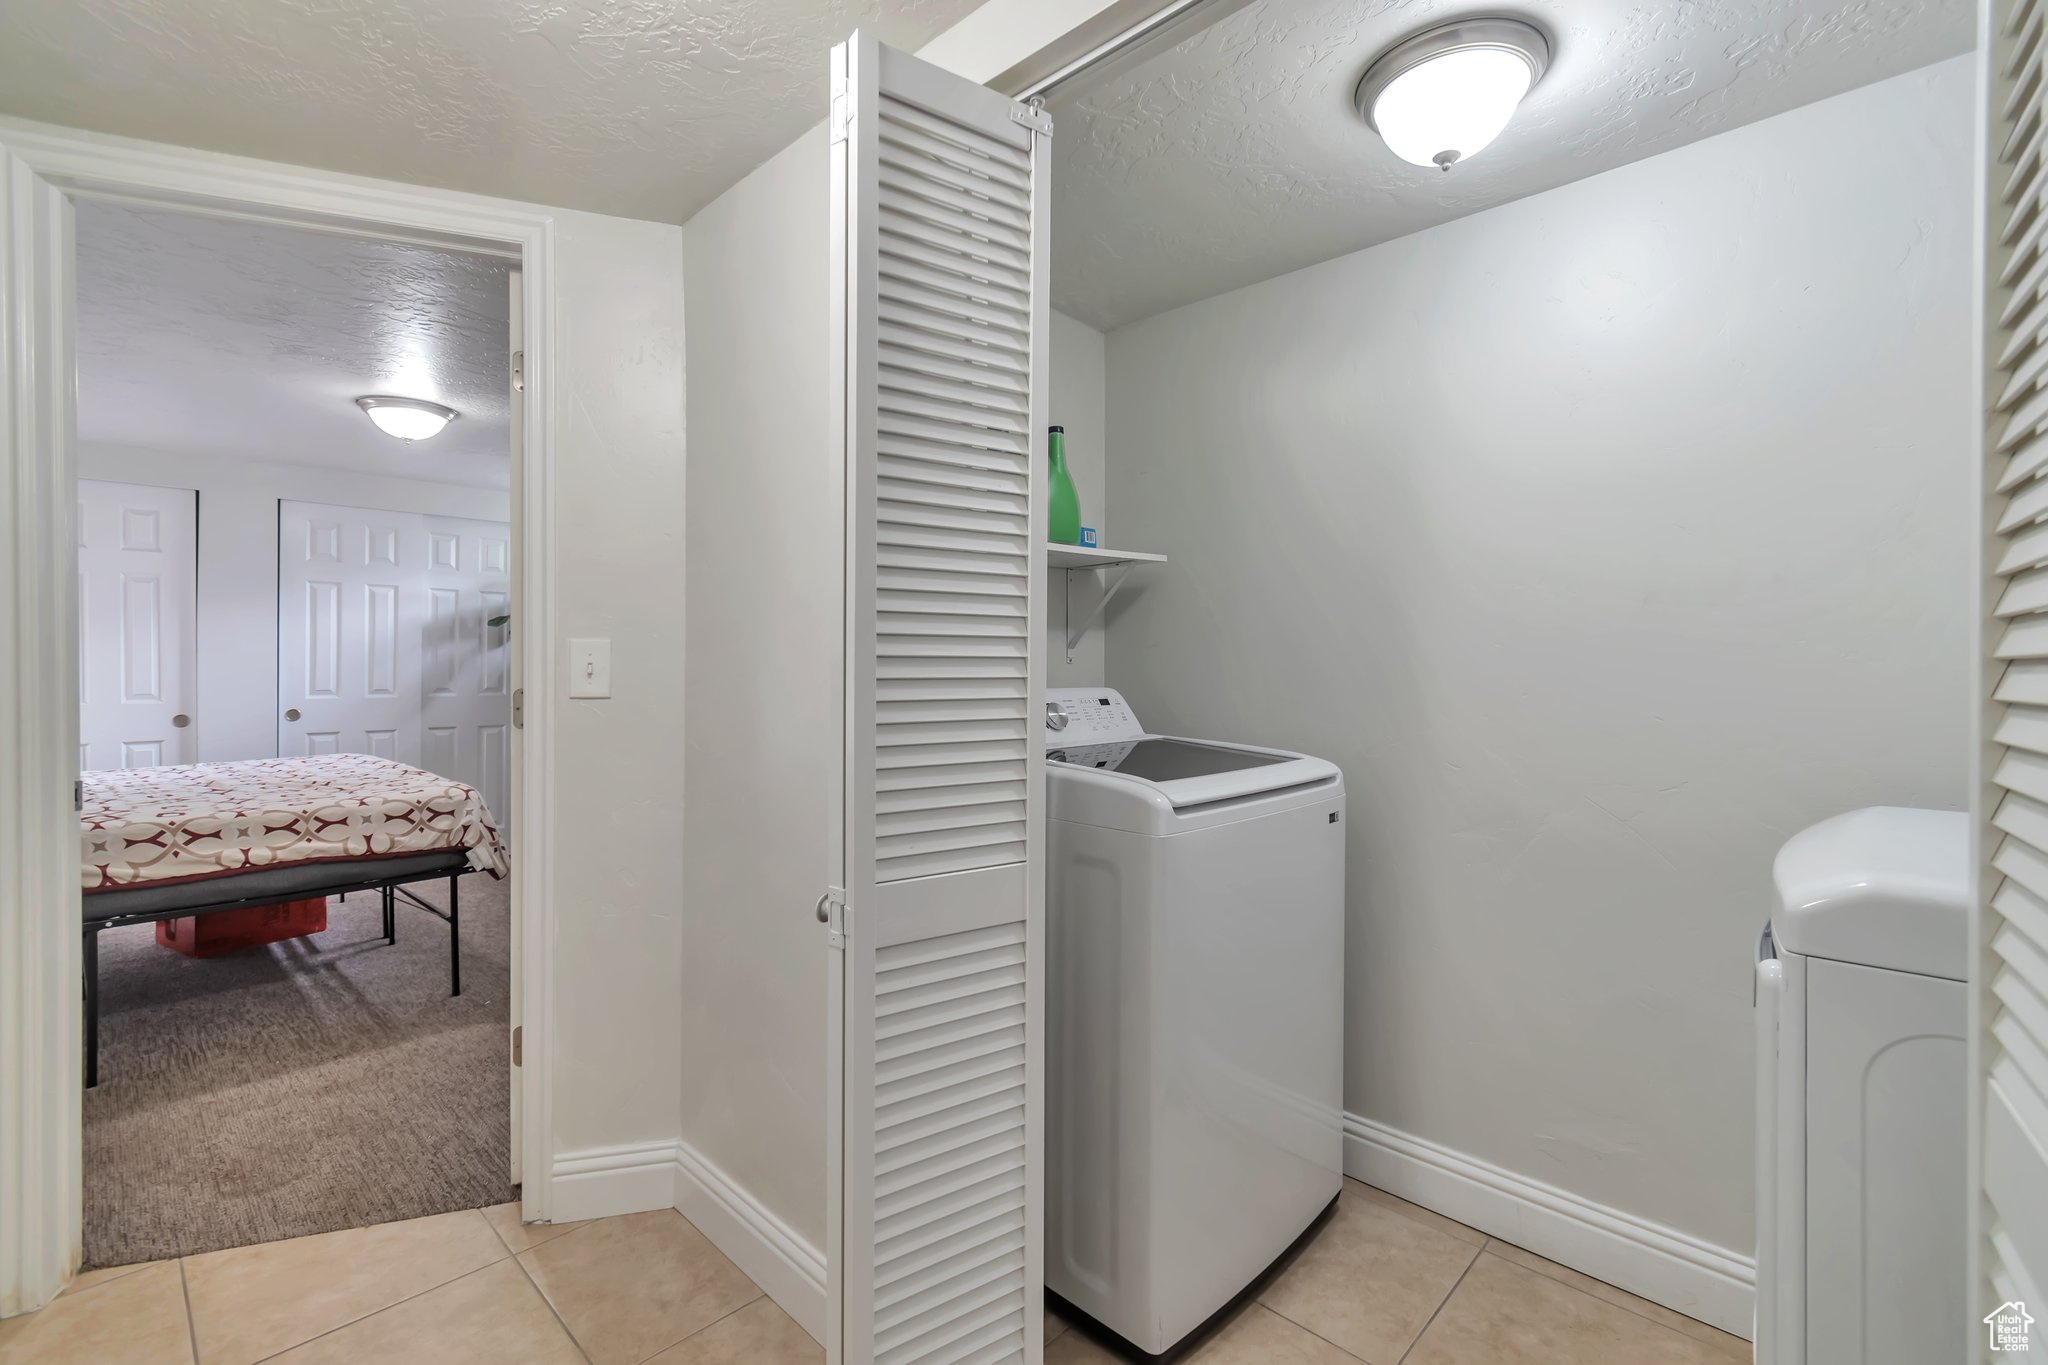 Laundry room featuring light carpet and washer and clothes dryer